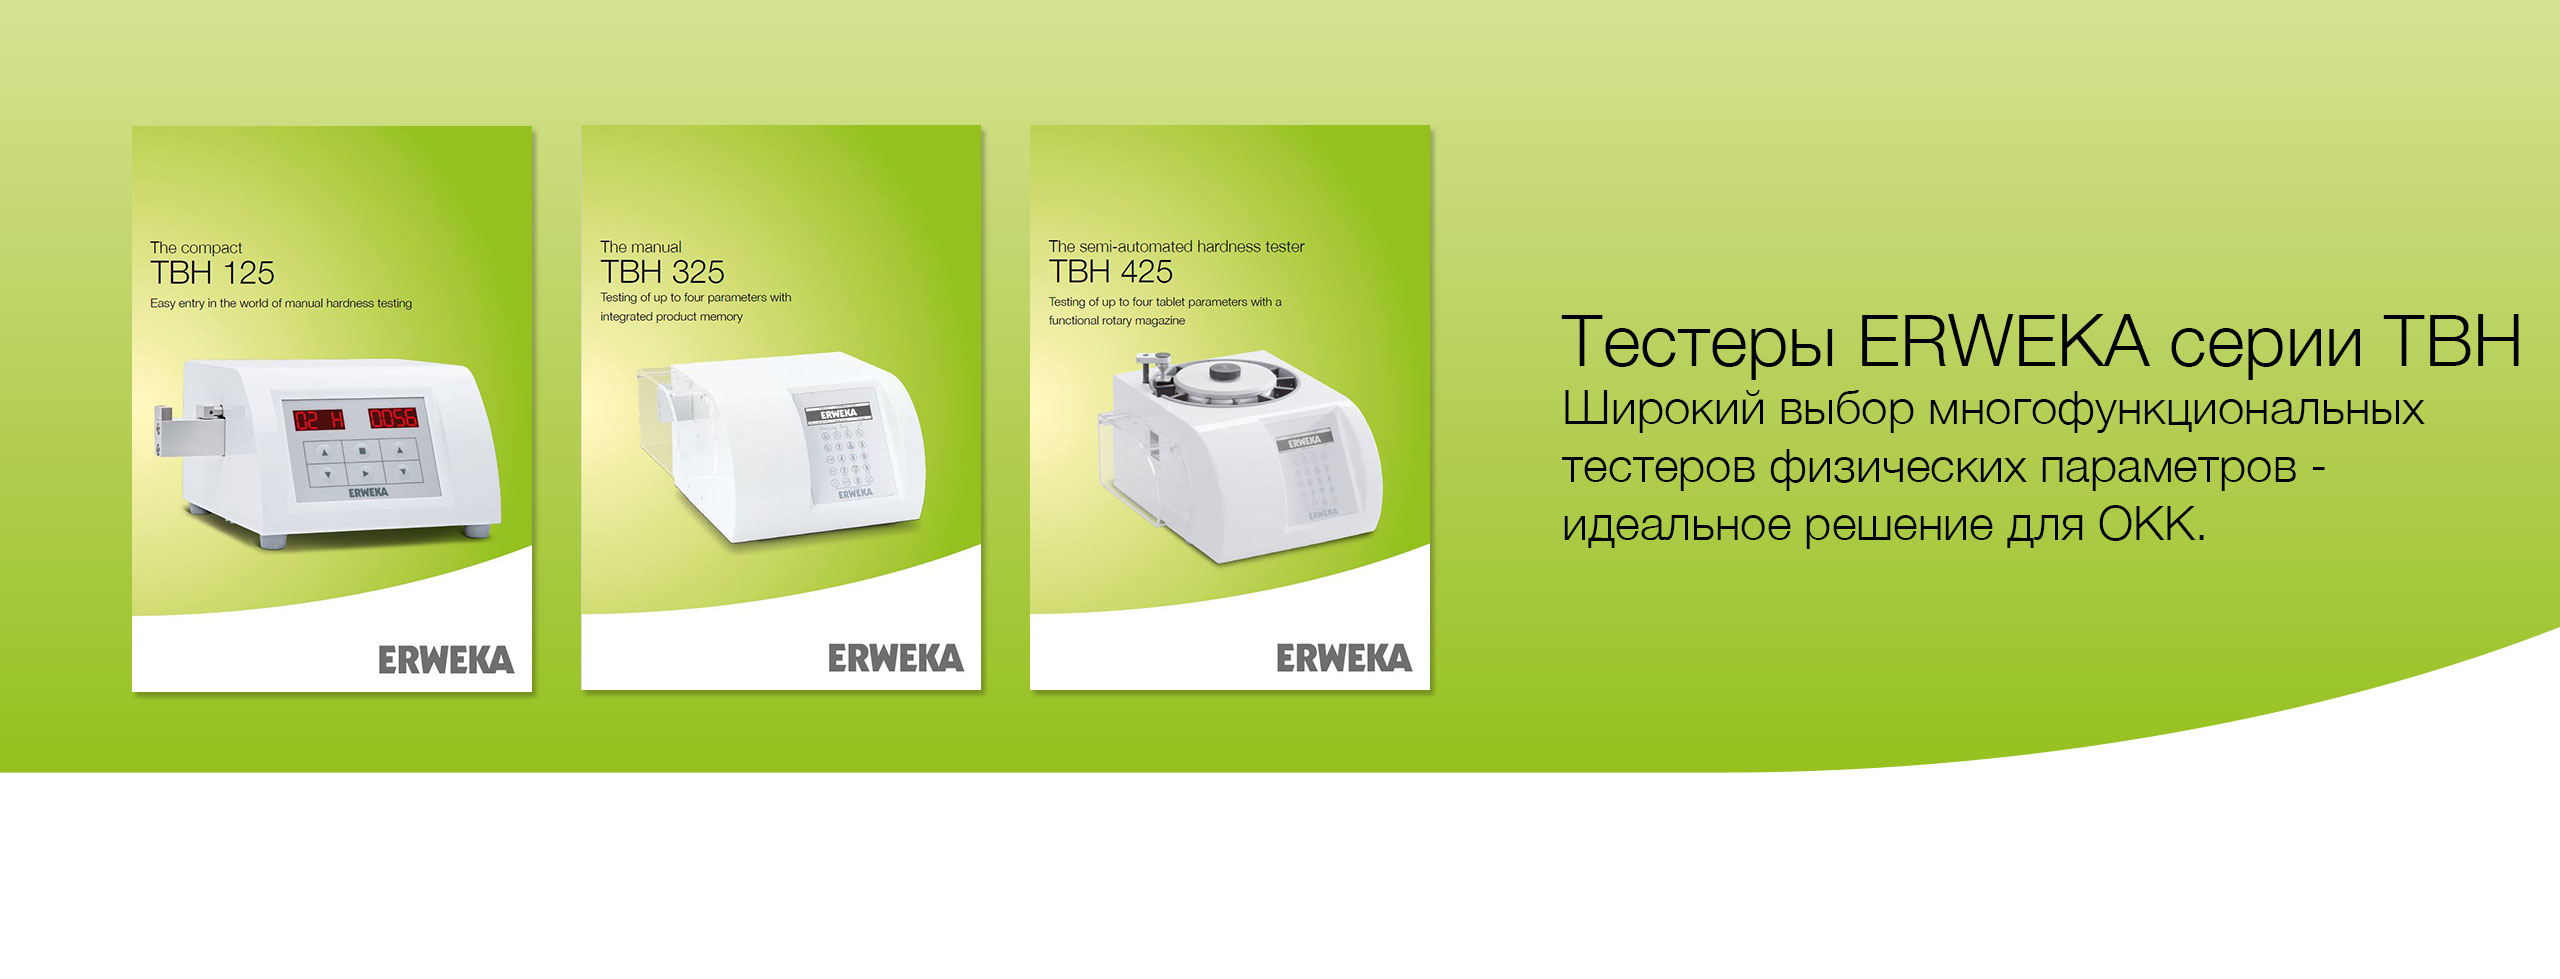 ERWEKA TBH Series - Broad range of tablet hardness and combination testers - The right solution for every challenge.